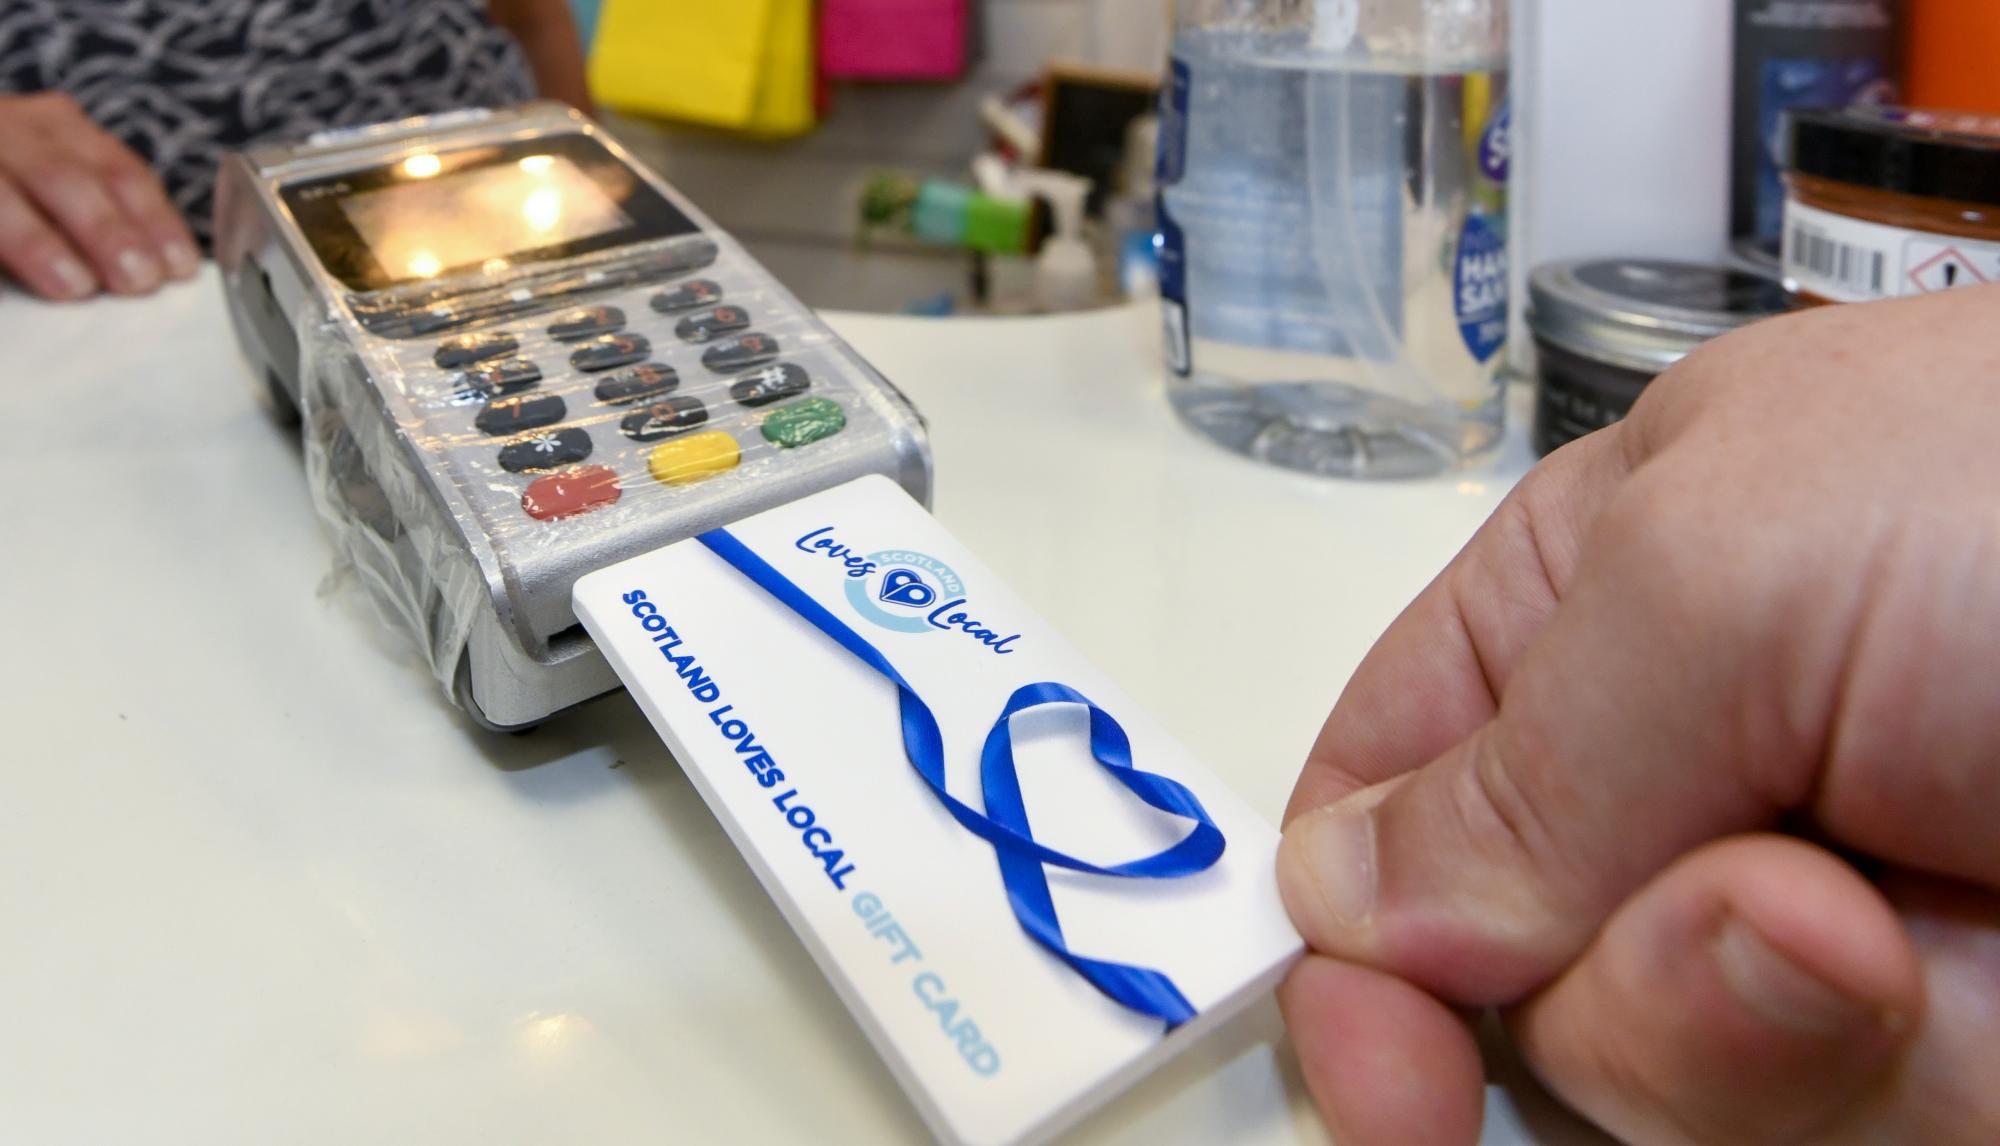 Scotland Loves Local card in use